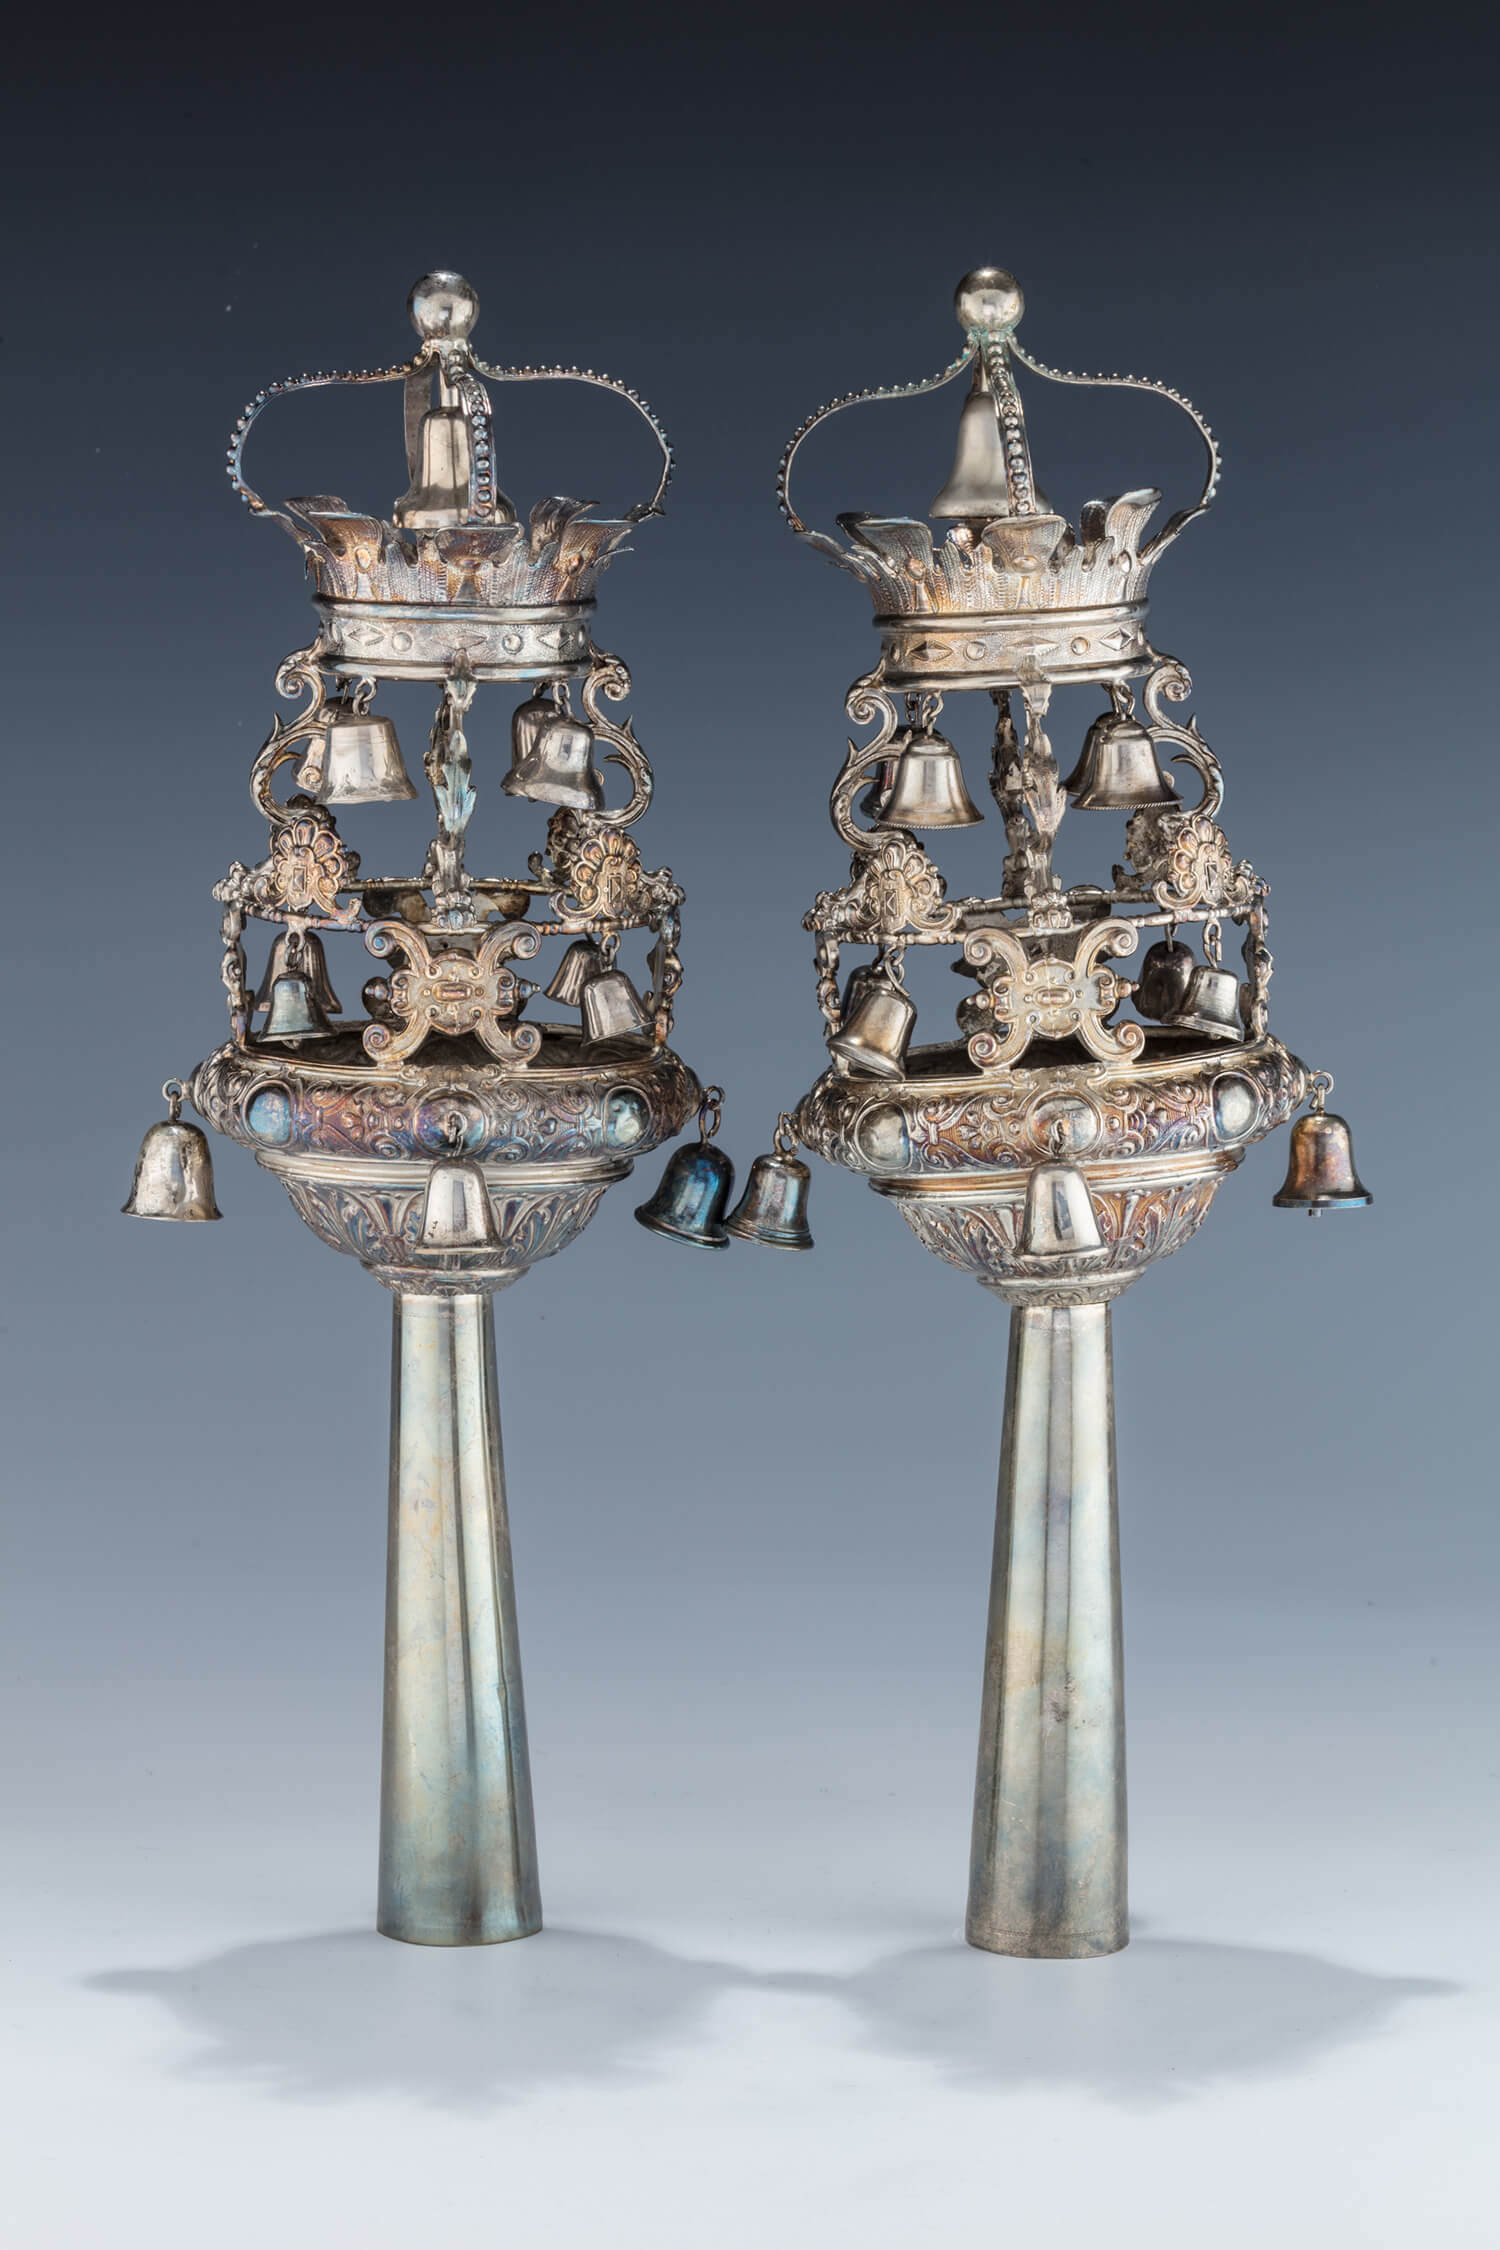 083. A PAIR OF LARGE SILVER TORAH FINIALS BY LAZARUS POSEN